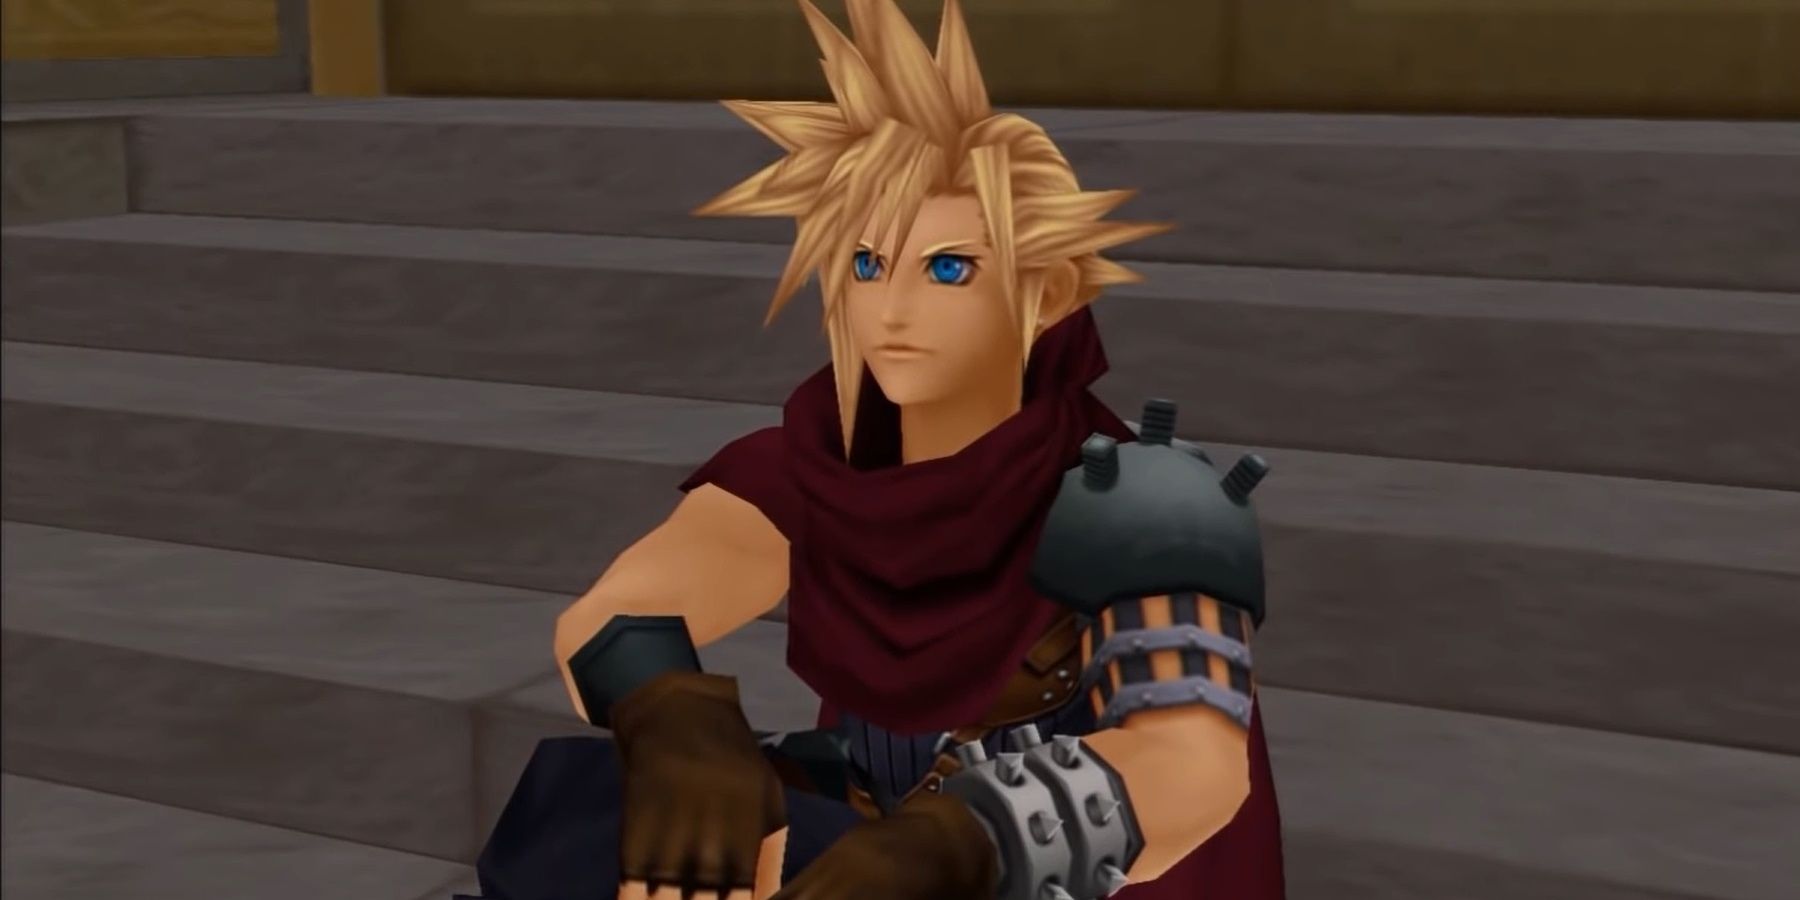 Cloud, star of Final Fantasy VII Remake, appears in Kingdom Hearts